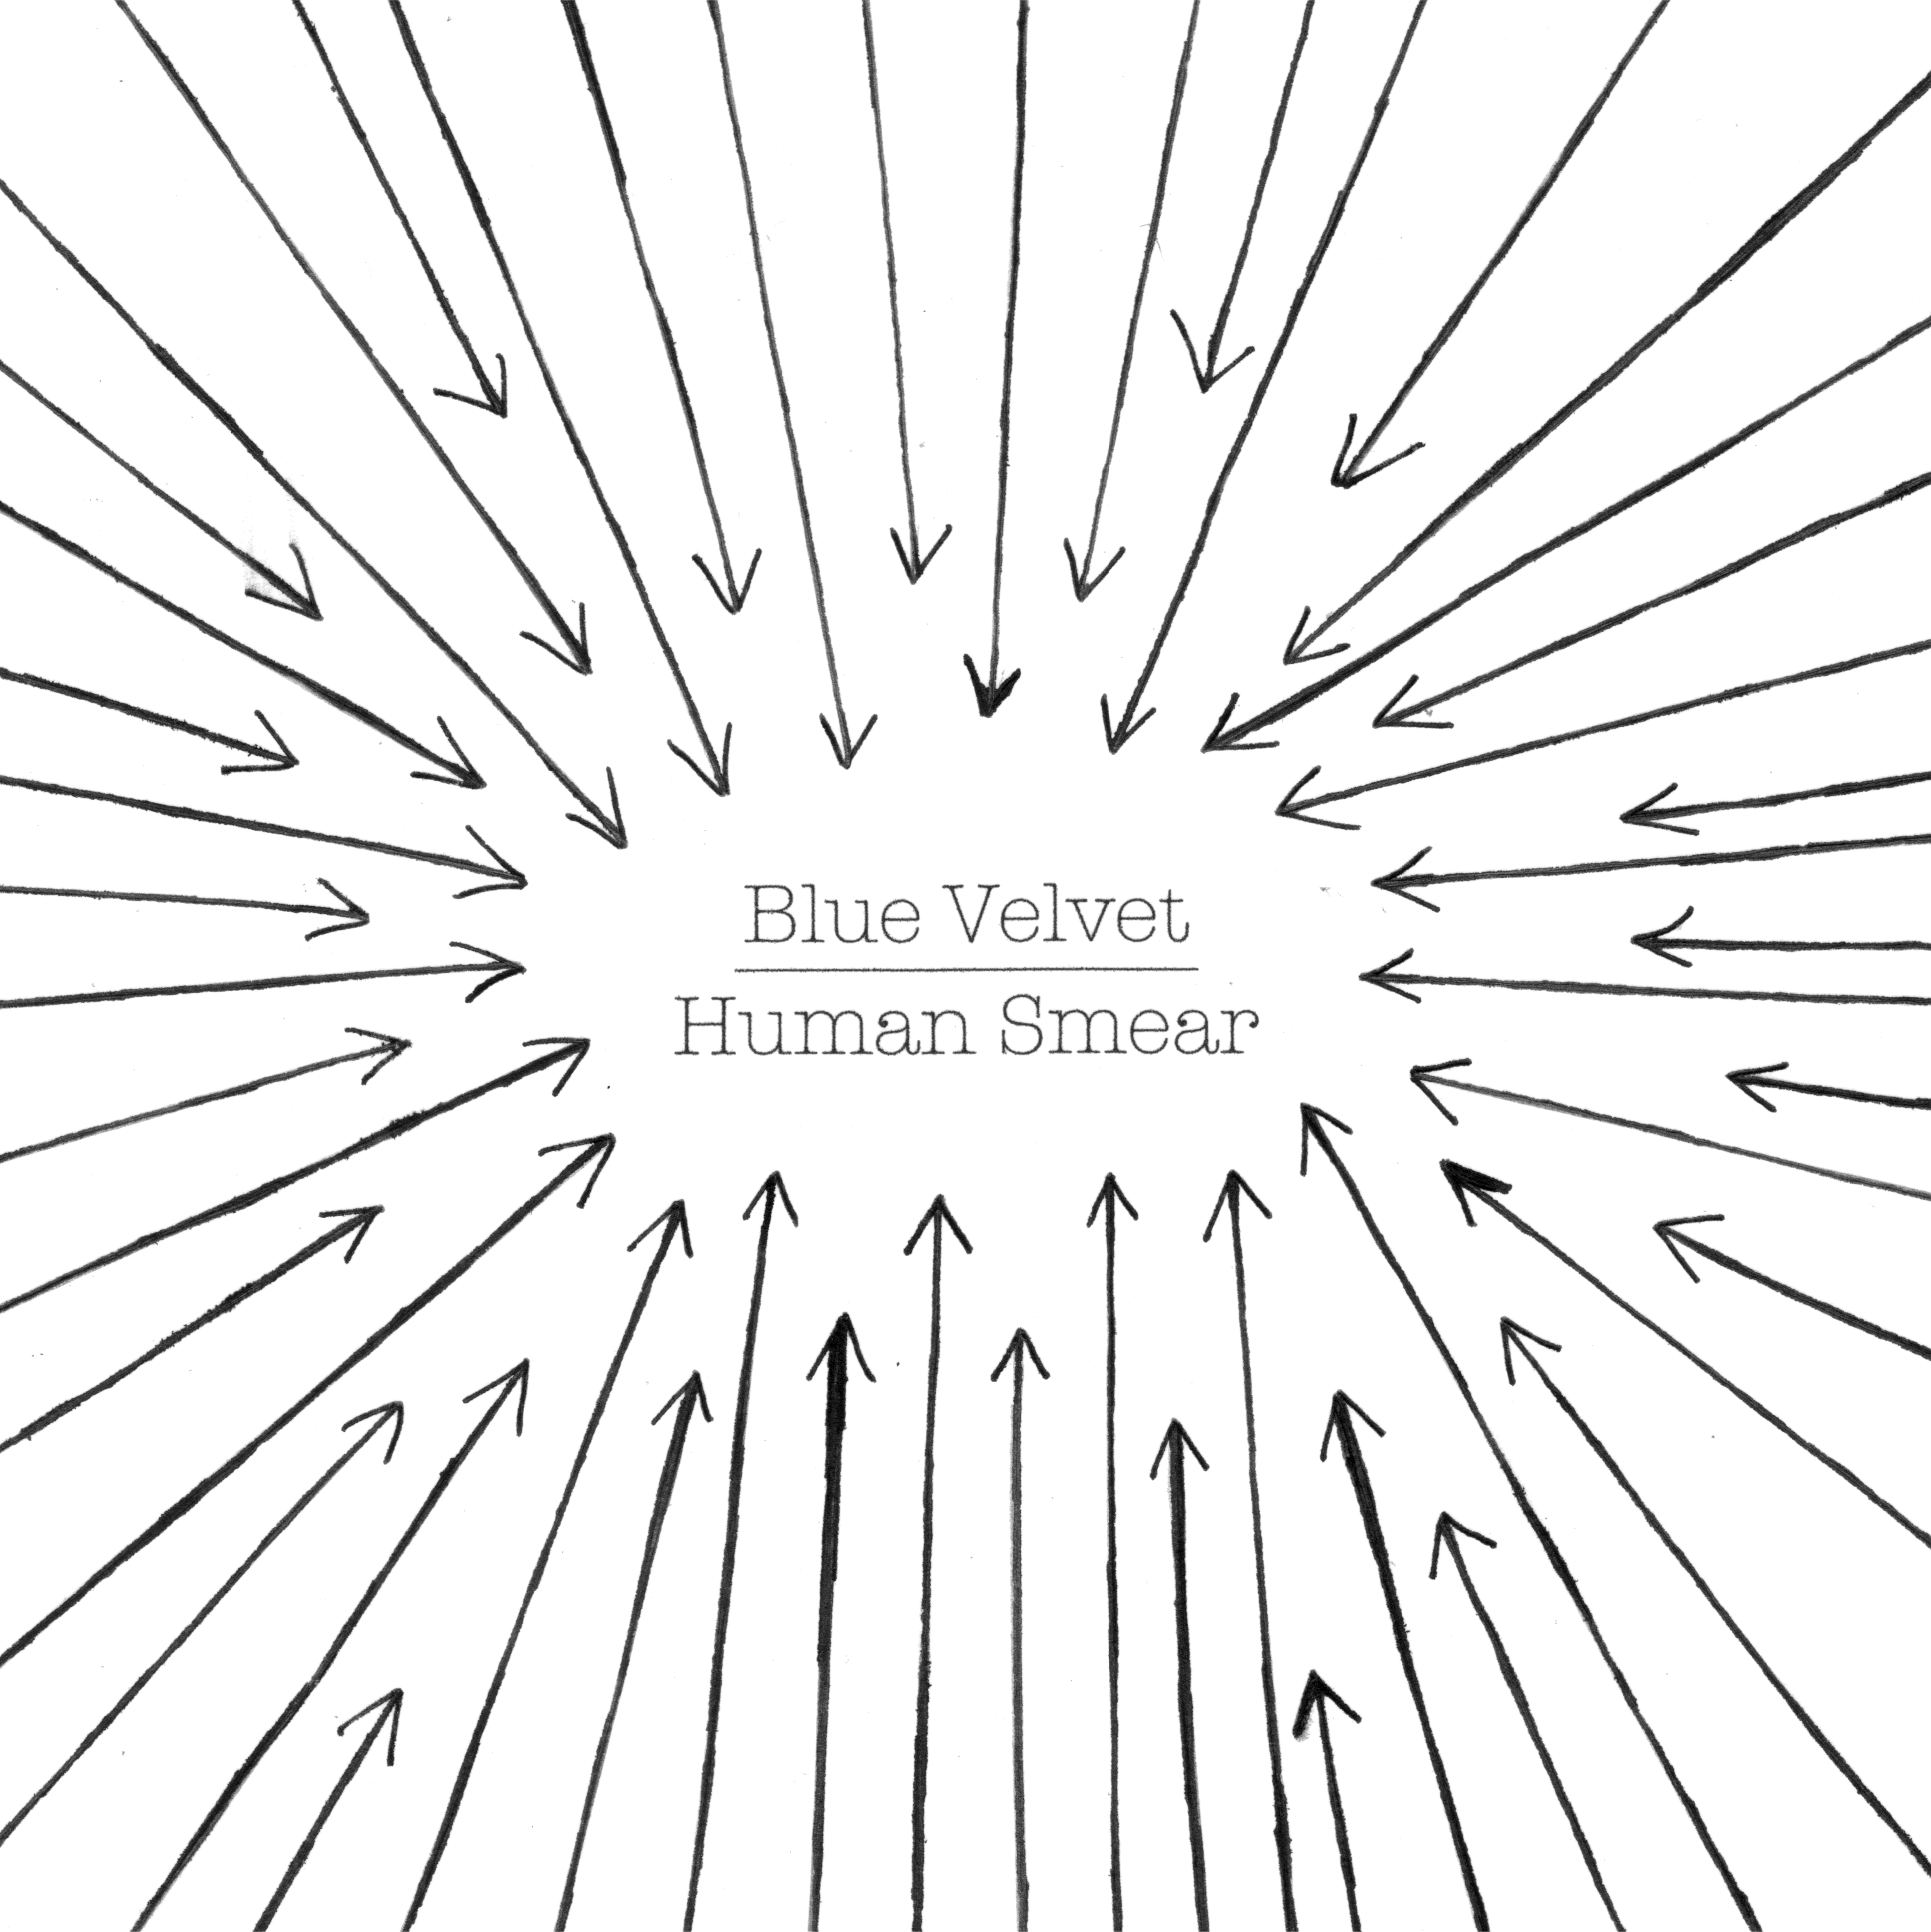 Blue Velvet - Human Smear EP - Blue Velvet - Human Smear EP - cover.png